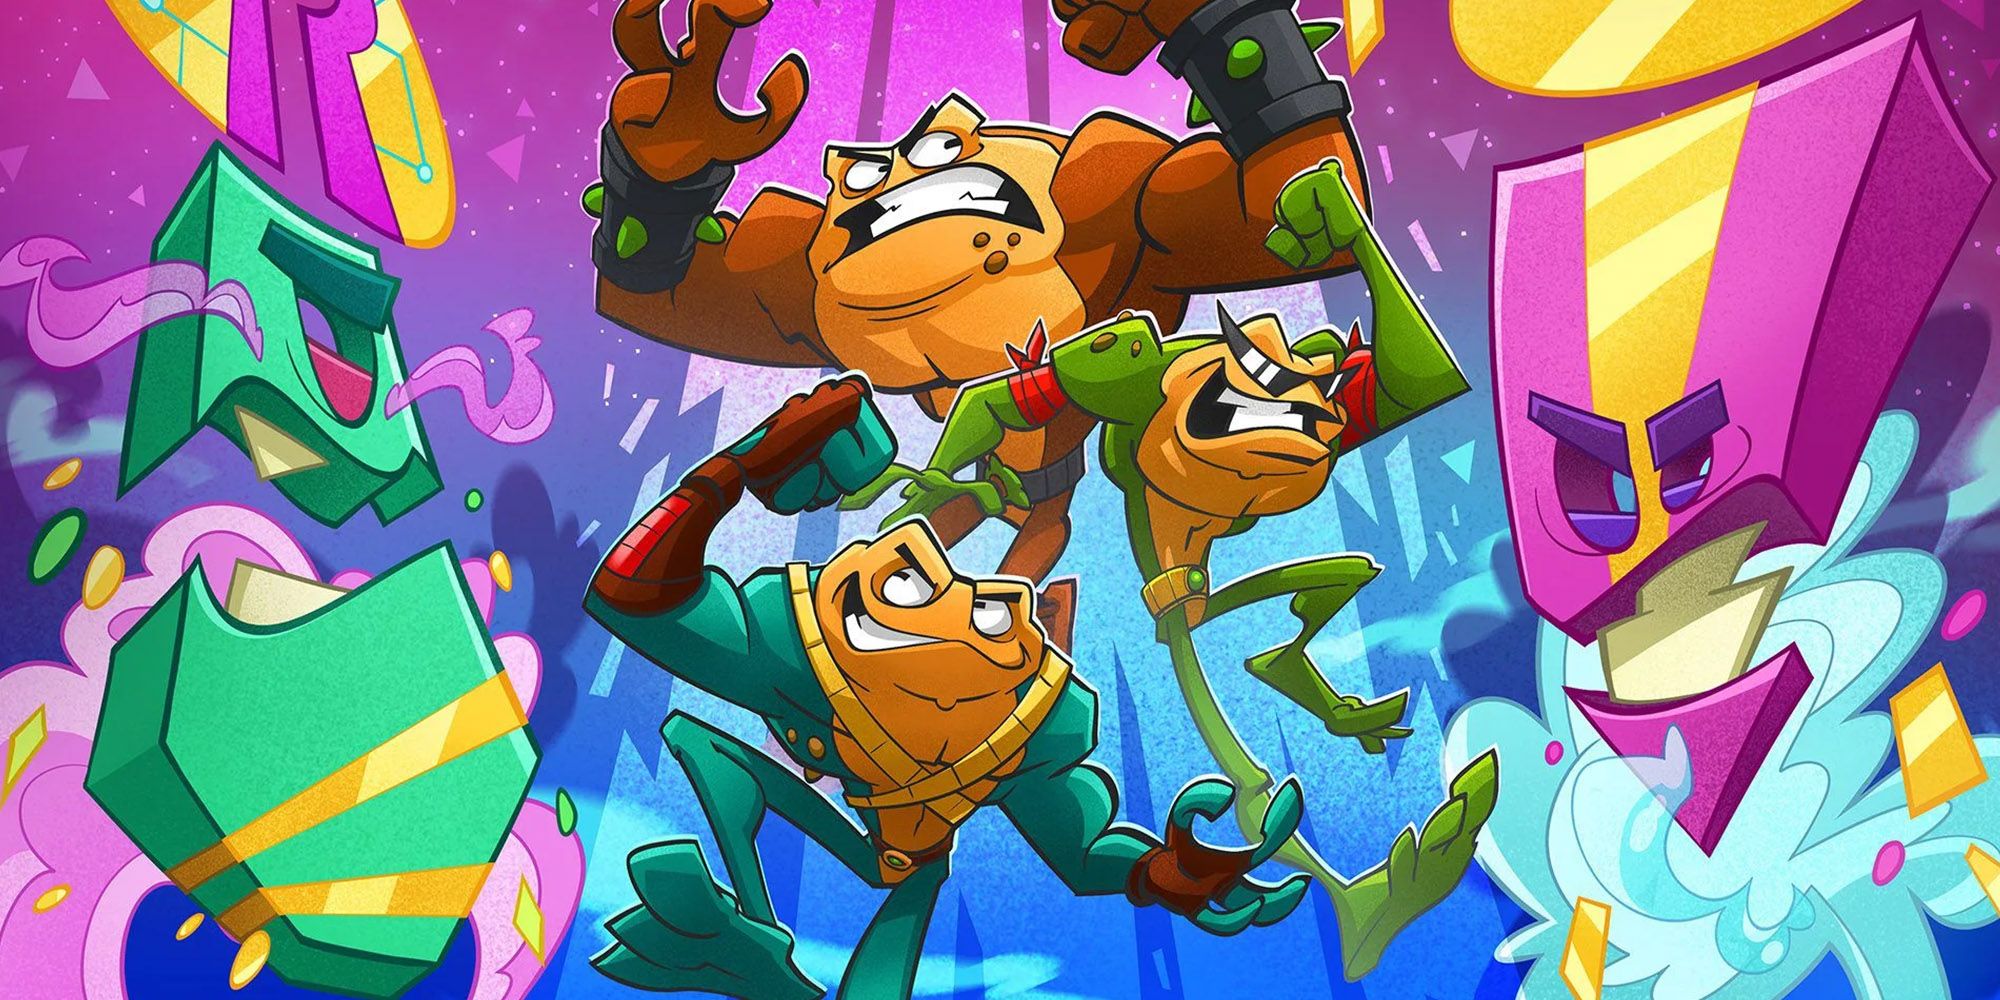 Battletoads - All Three Battletoads Facing Off Against End Bosses In Promo Art For Game